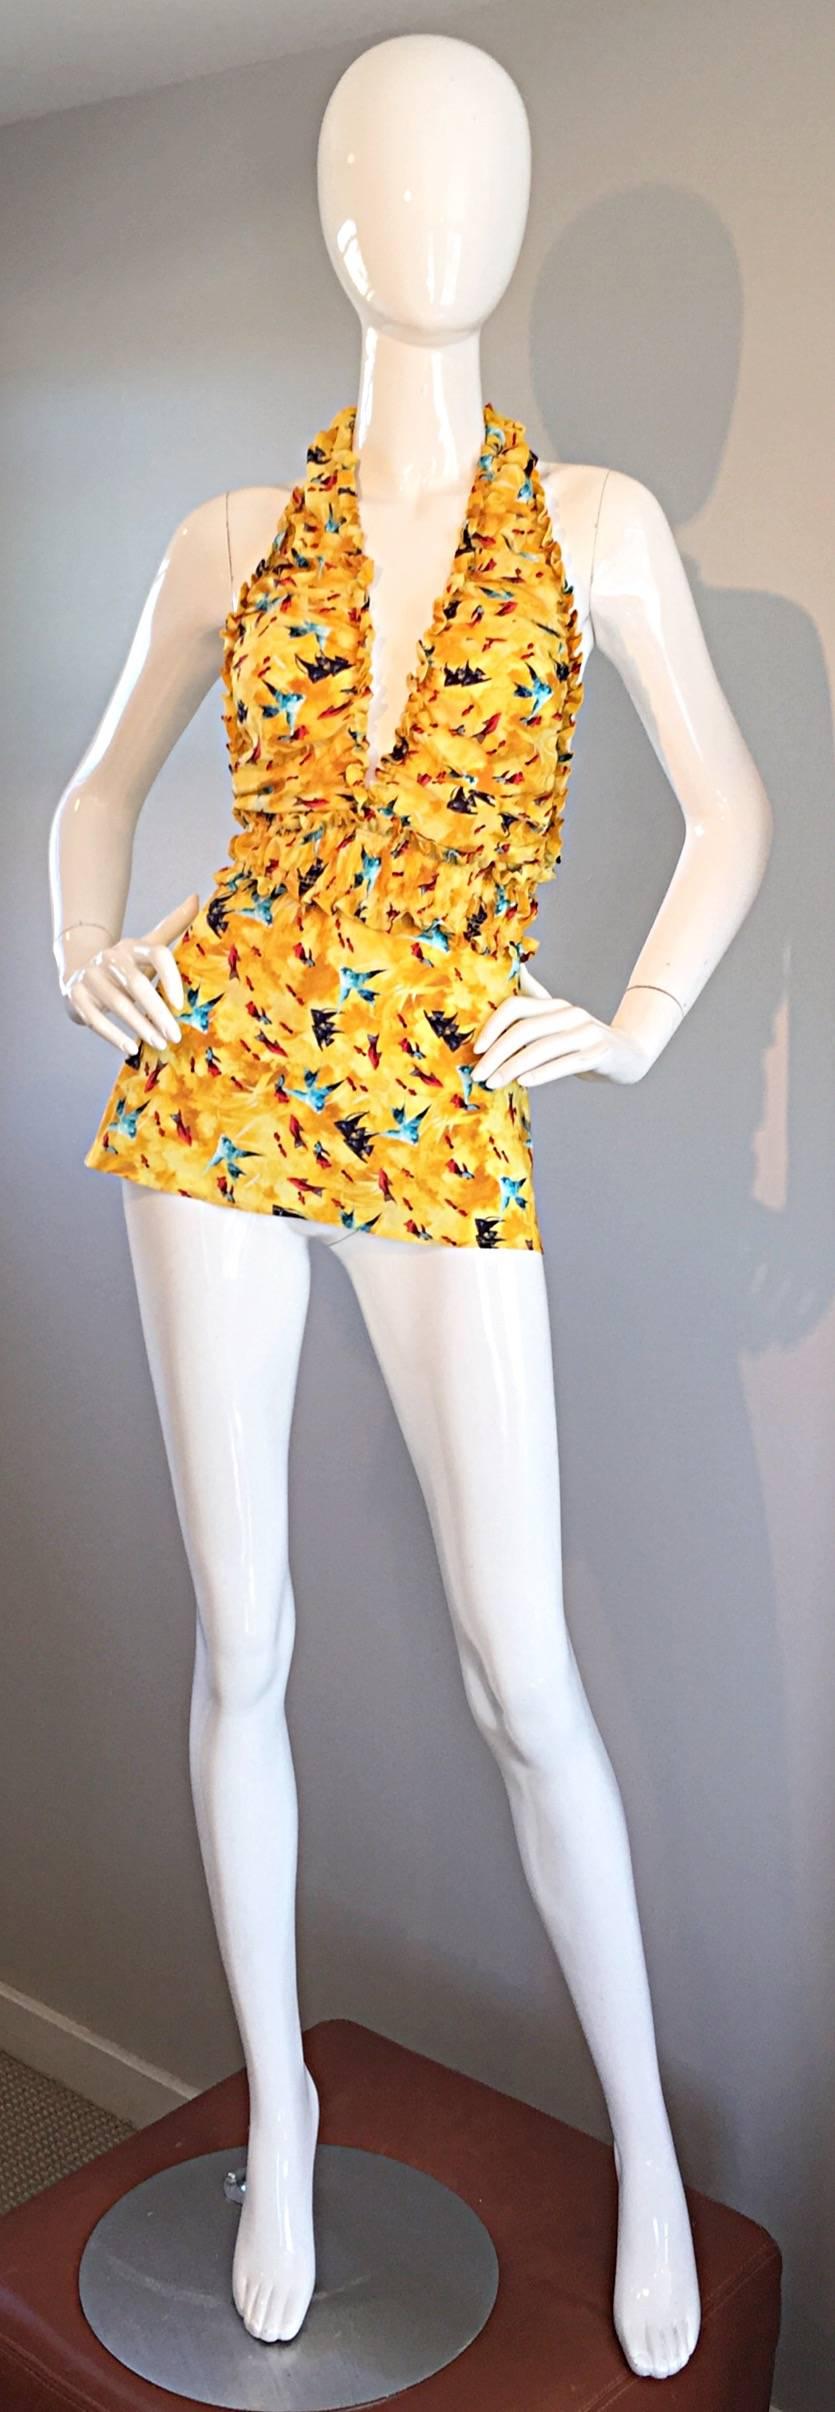 Sexy vintage FENDI, by Karl Lagerfeld, early 1990s silk halter top! Features awesome prints of fish throughout. Plunging neckline, with ruffles at bodice and waist. Very flattering. Mustard Yellow color, with blue and red fish. Can easily go from